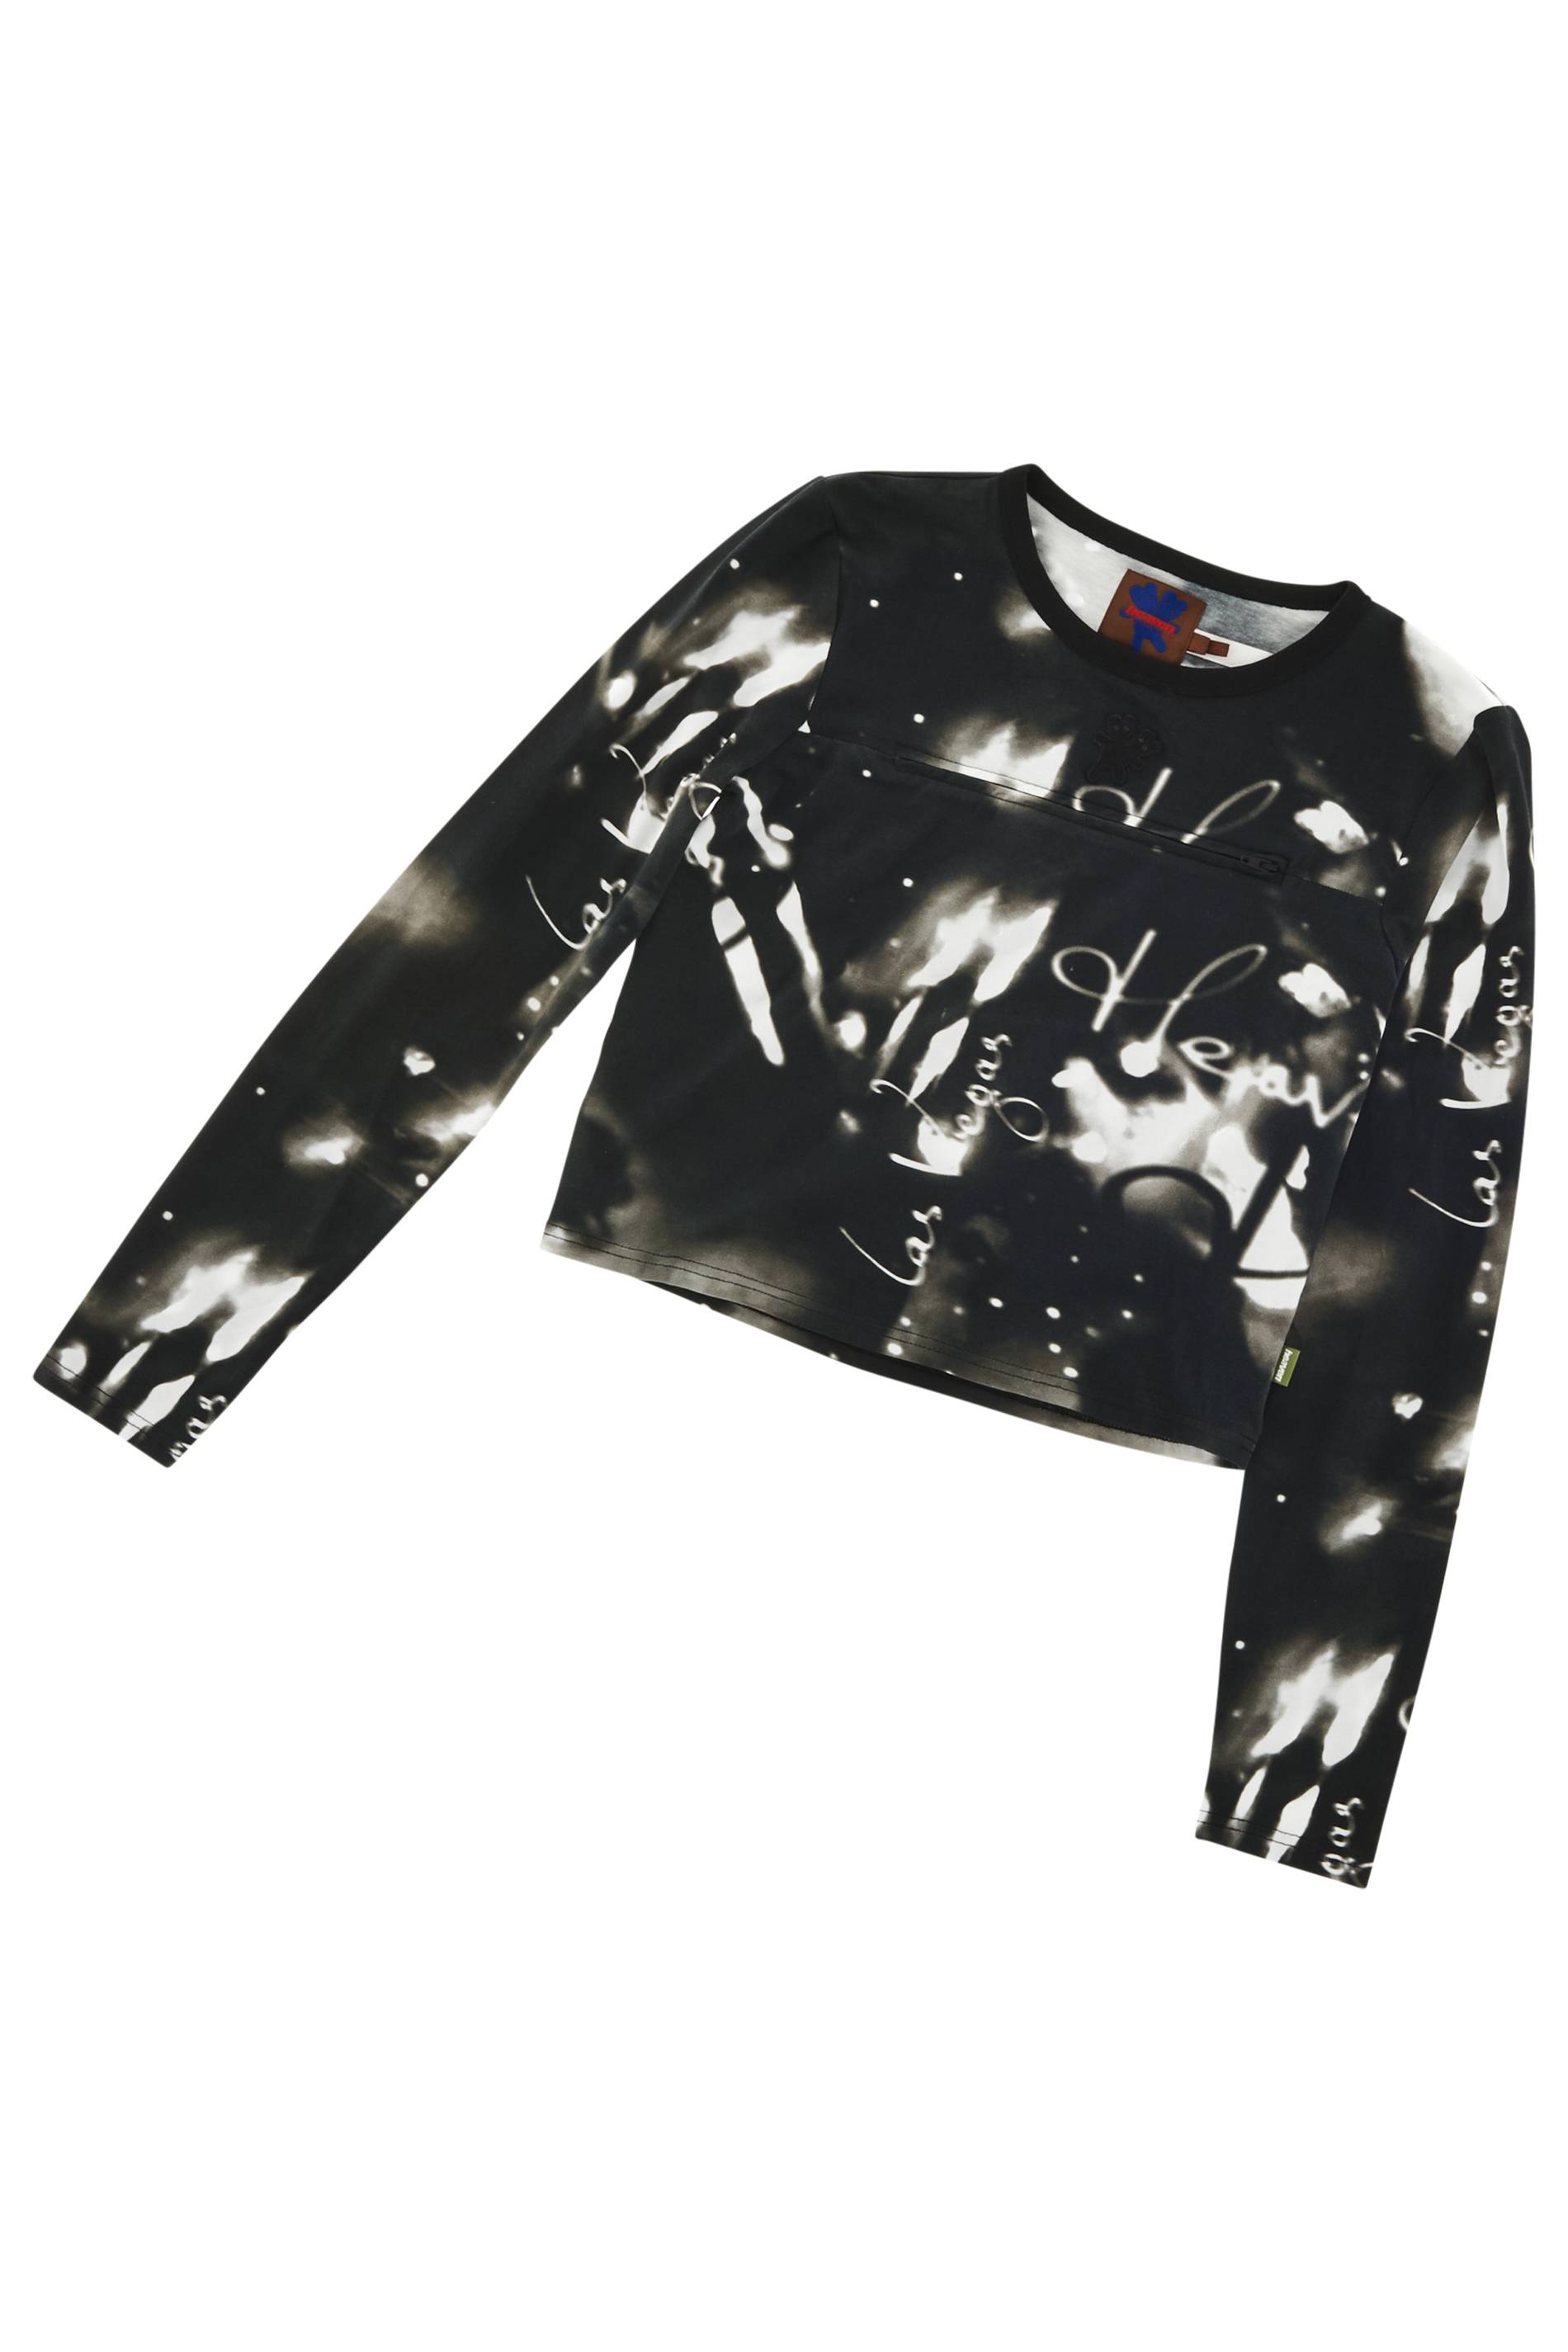 Marc Jacobs Heaven or Las Vegas collection; long sleeves